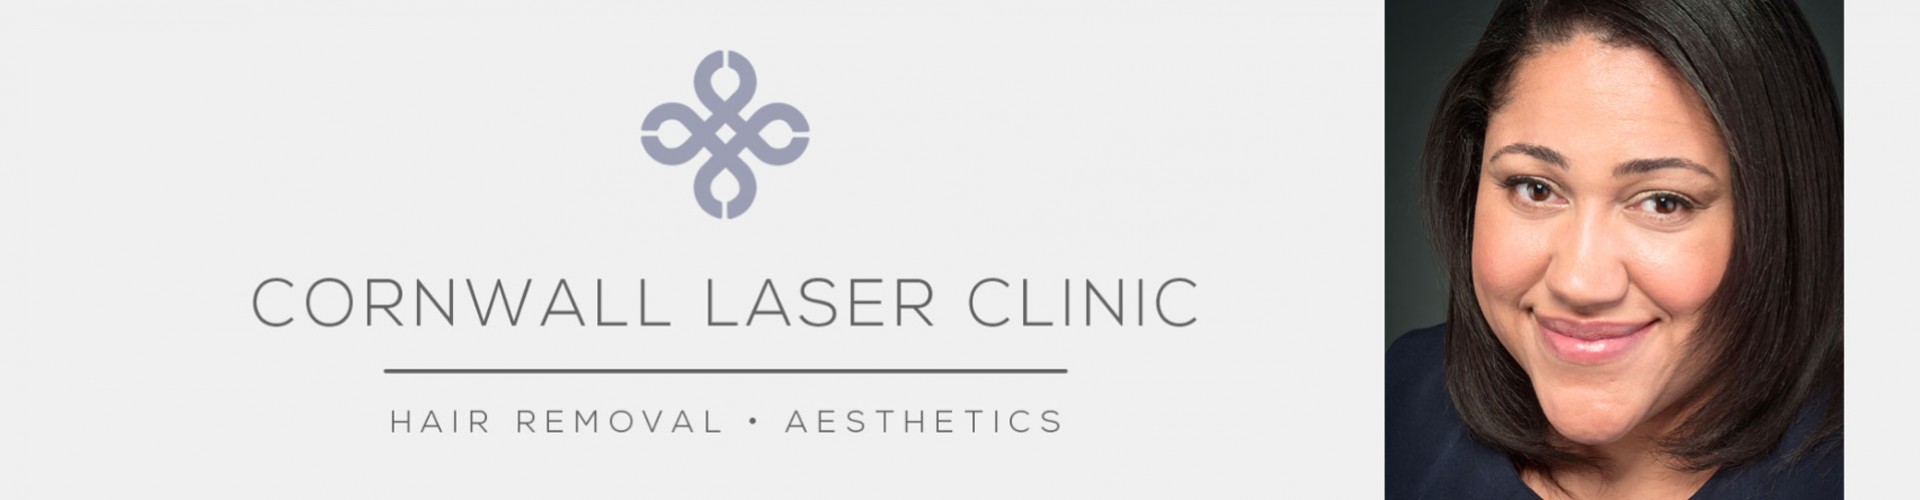 cornwall laser clinic